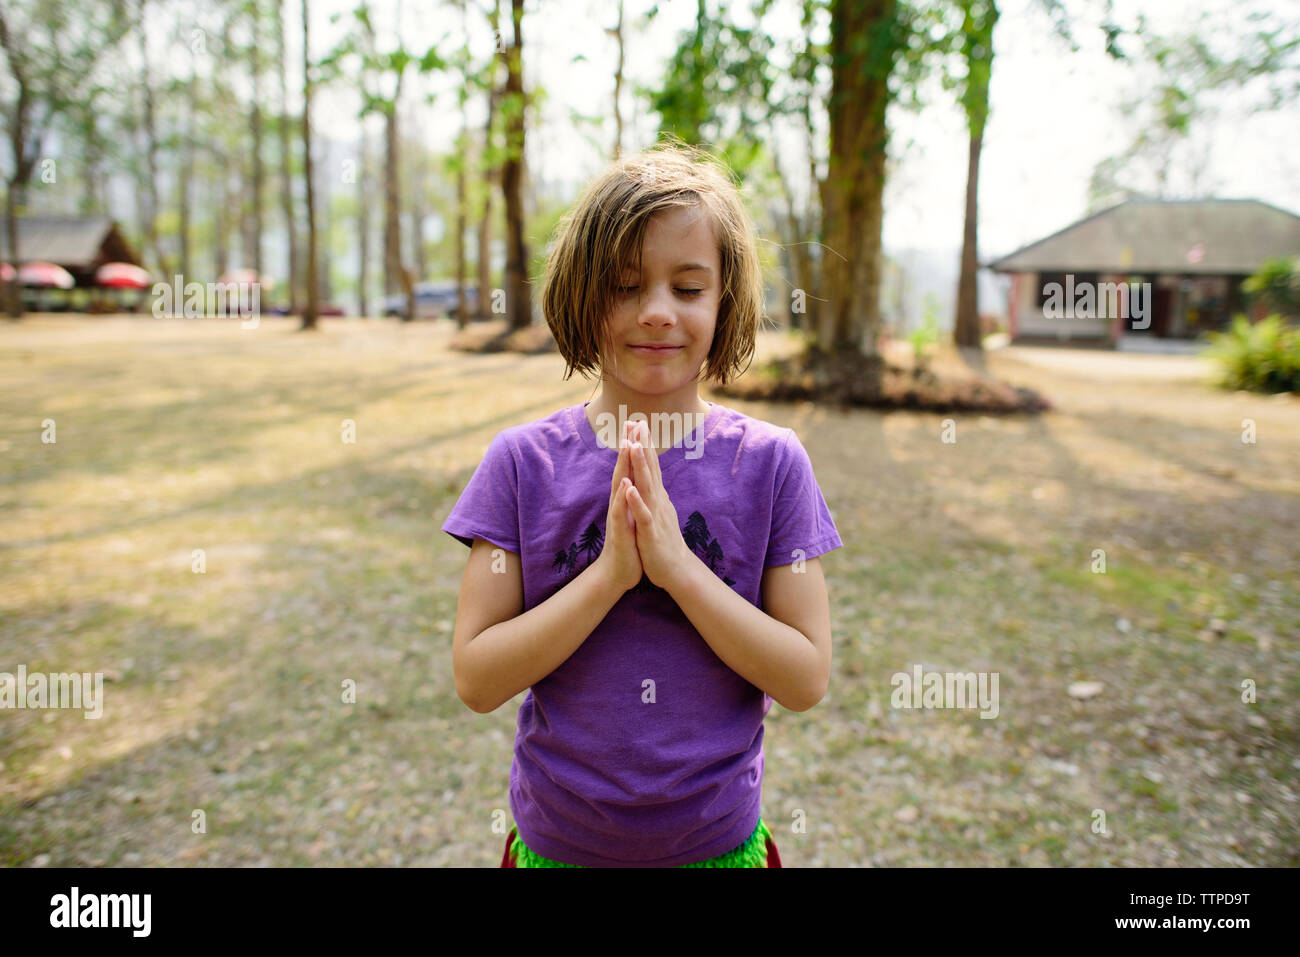 Girl with eyes closed doing hands clasped while standing against sky Stock Photo